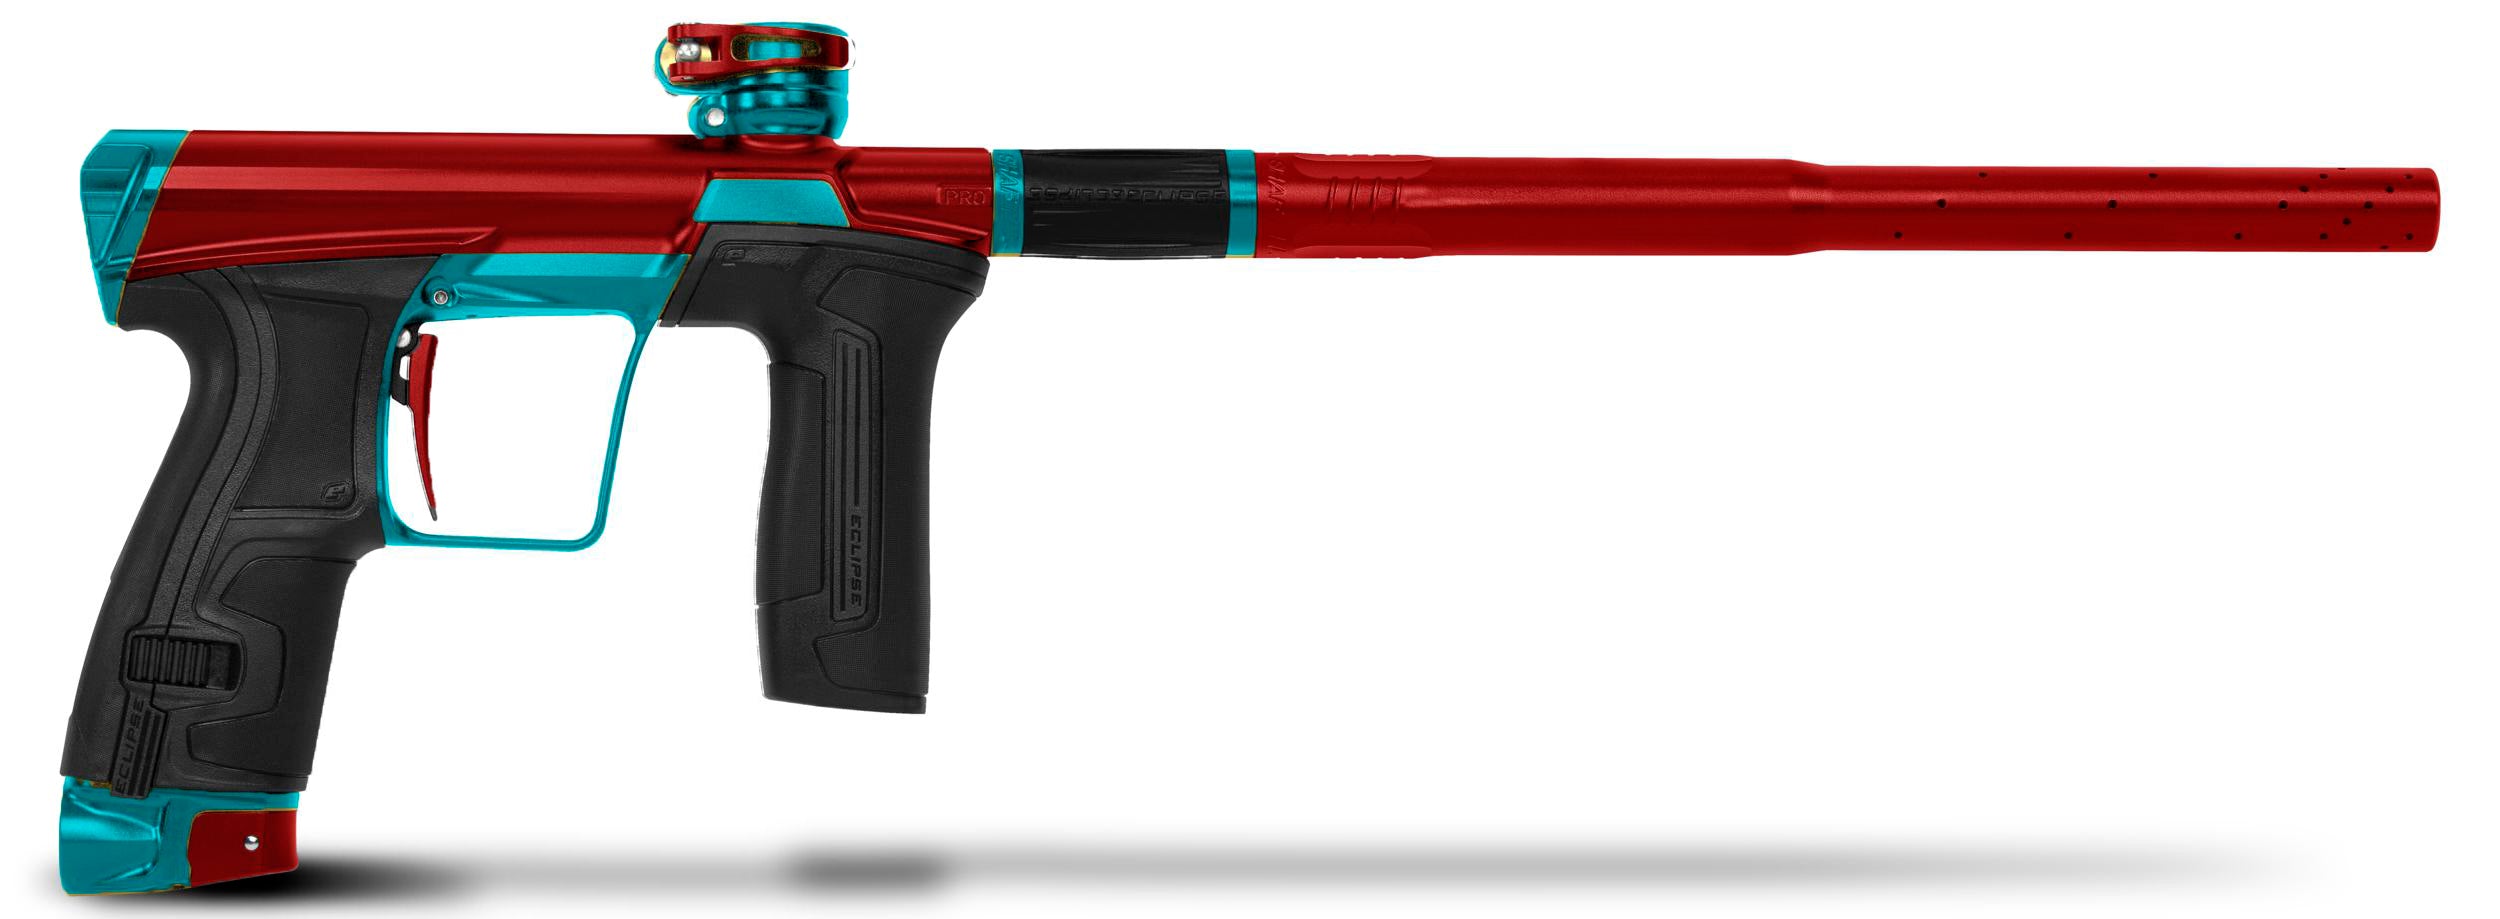 Planet Eclipse Geo CS2 Pro Paintball Marker - Red/Teal (Heat Wave/Cyclone)